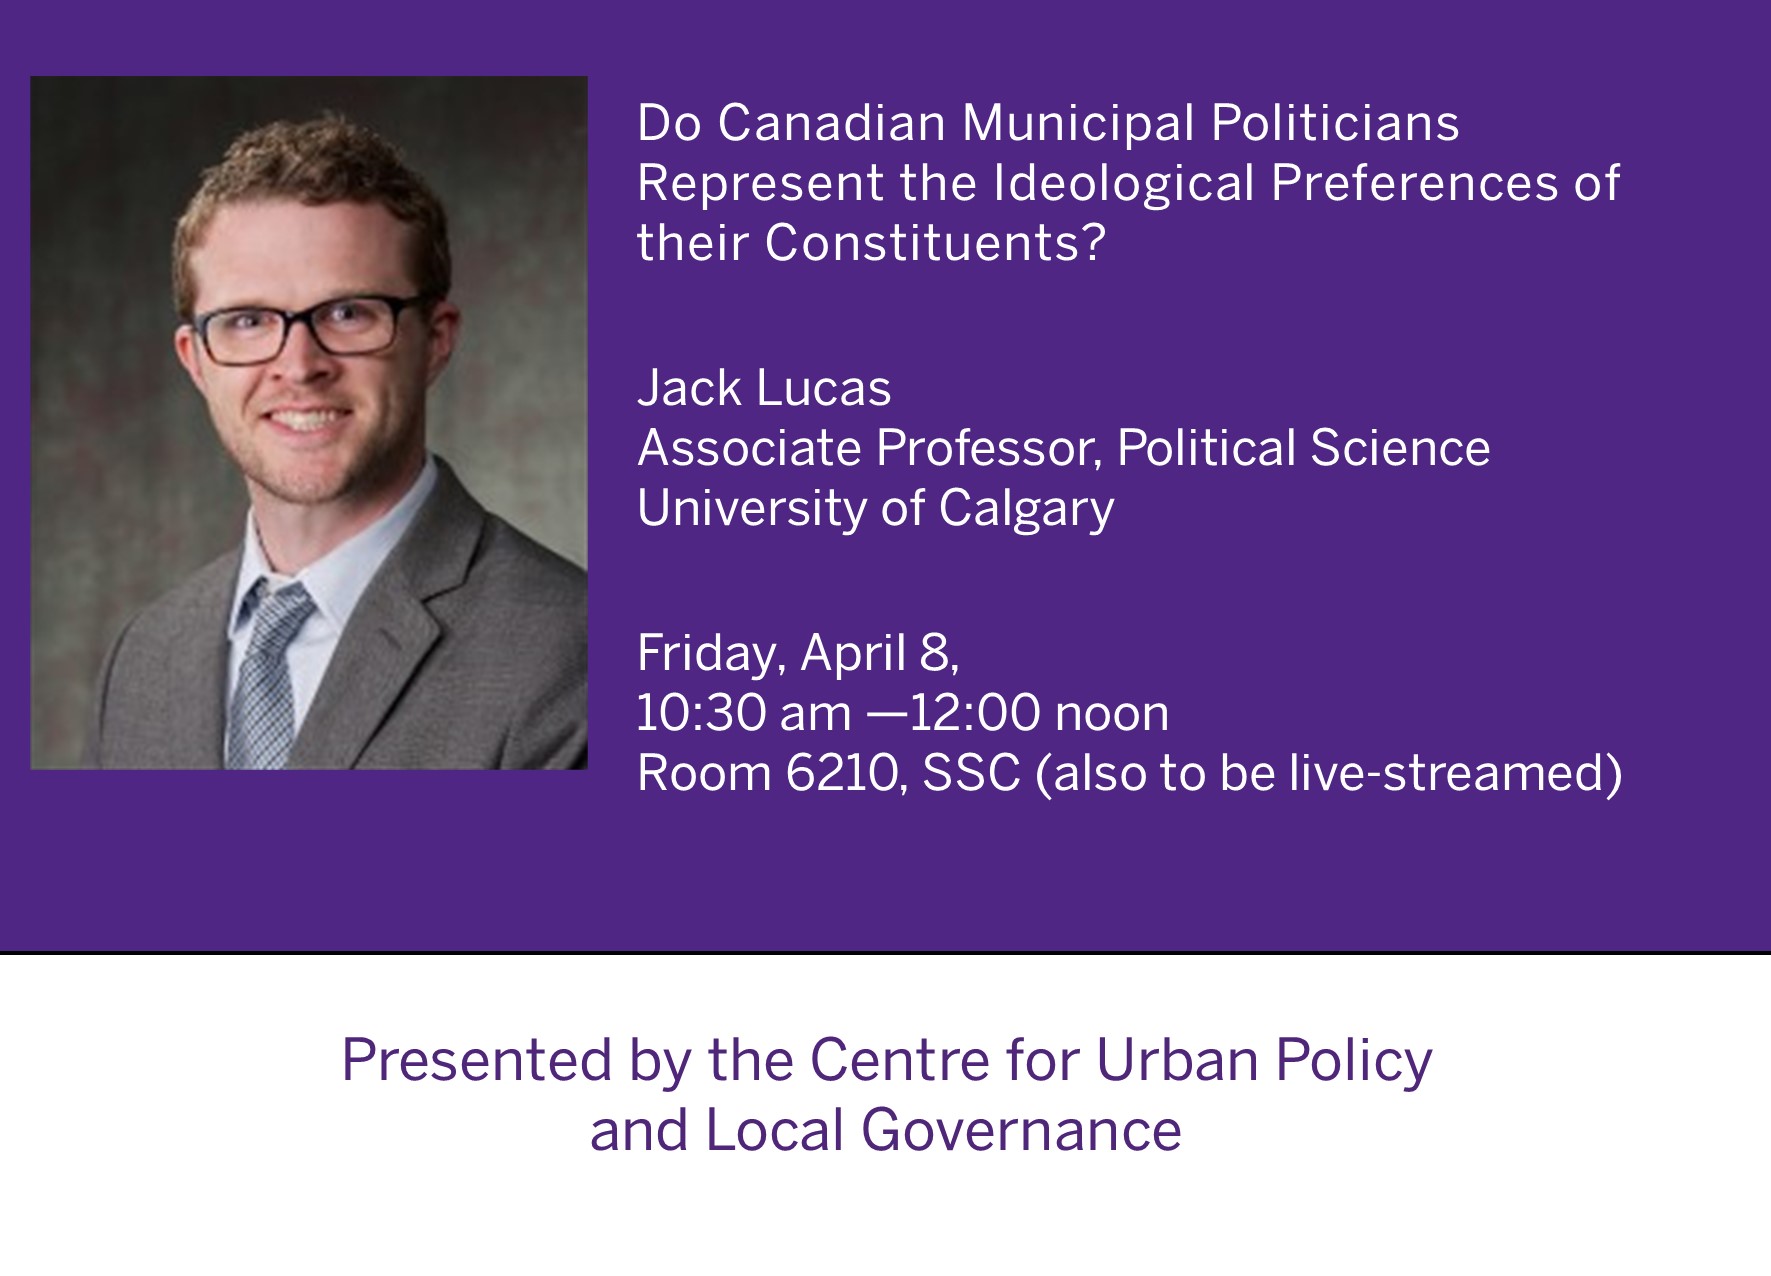 Do Canadian Municipal Politicians Represent the Ideological Preferences of their Constituents?